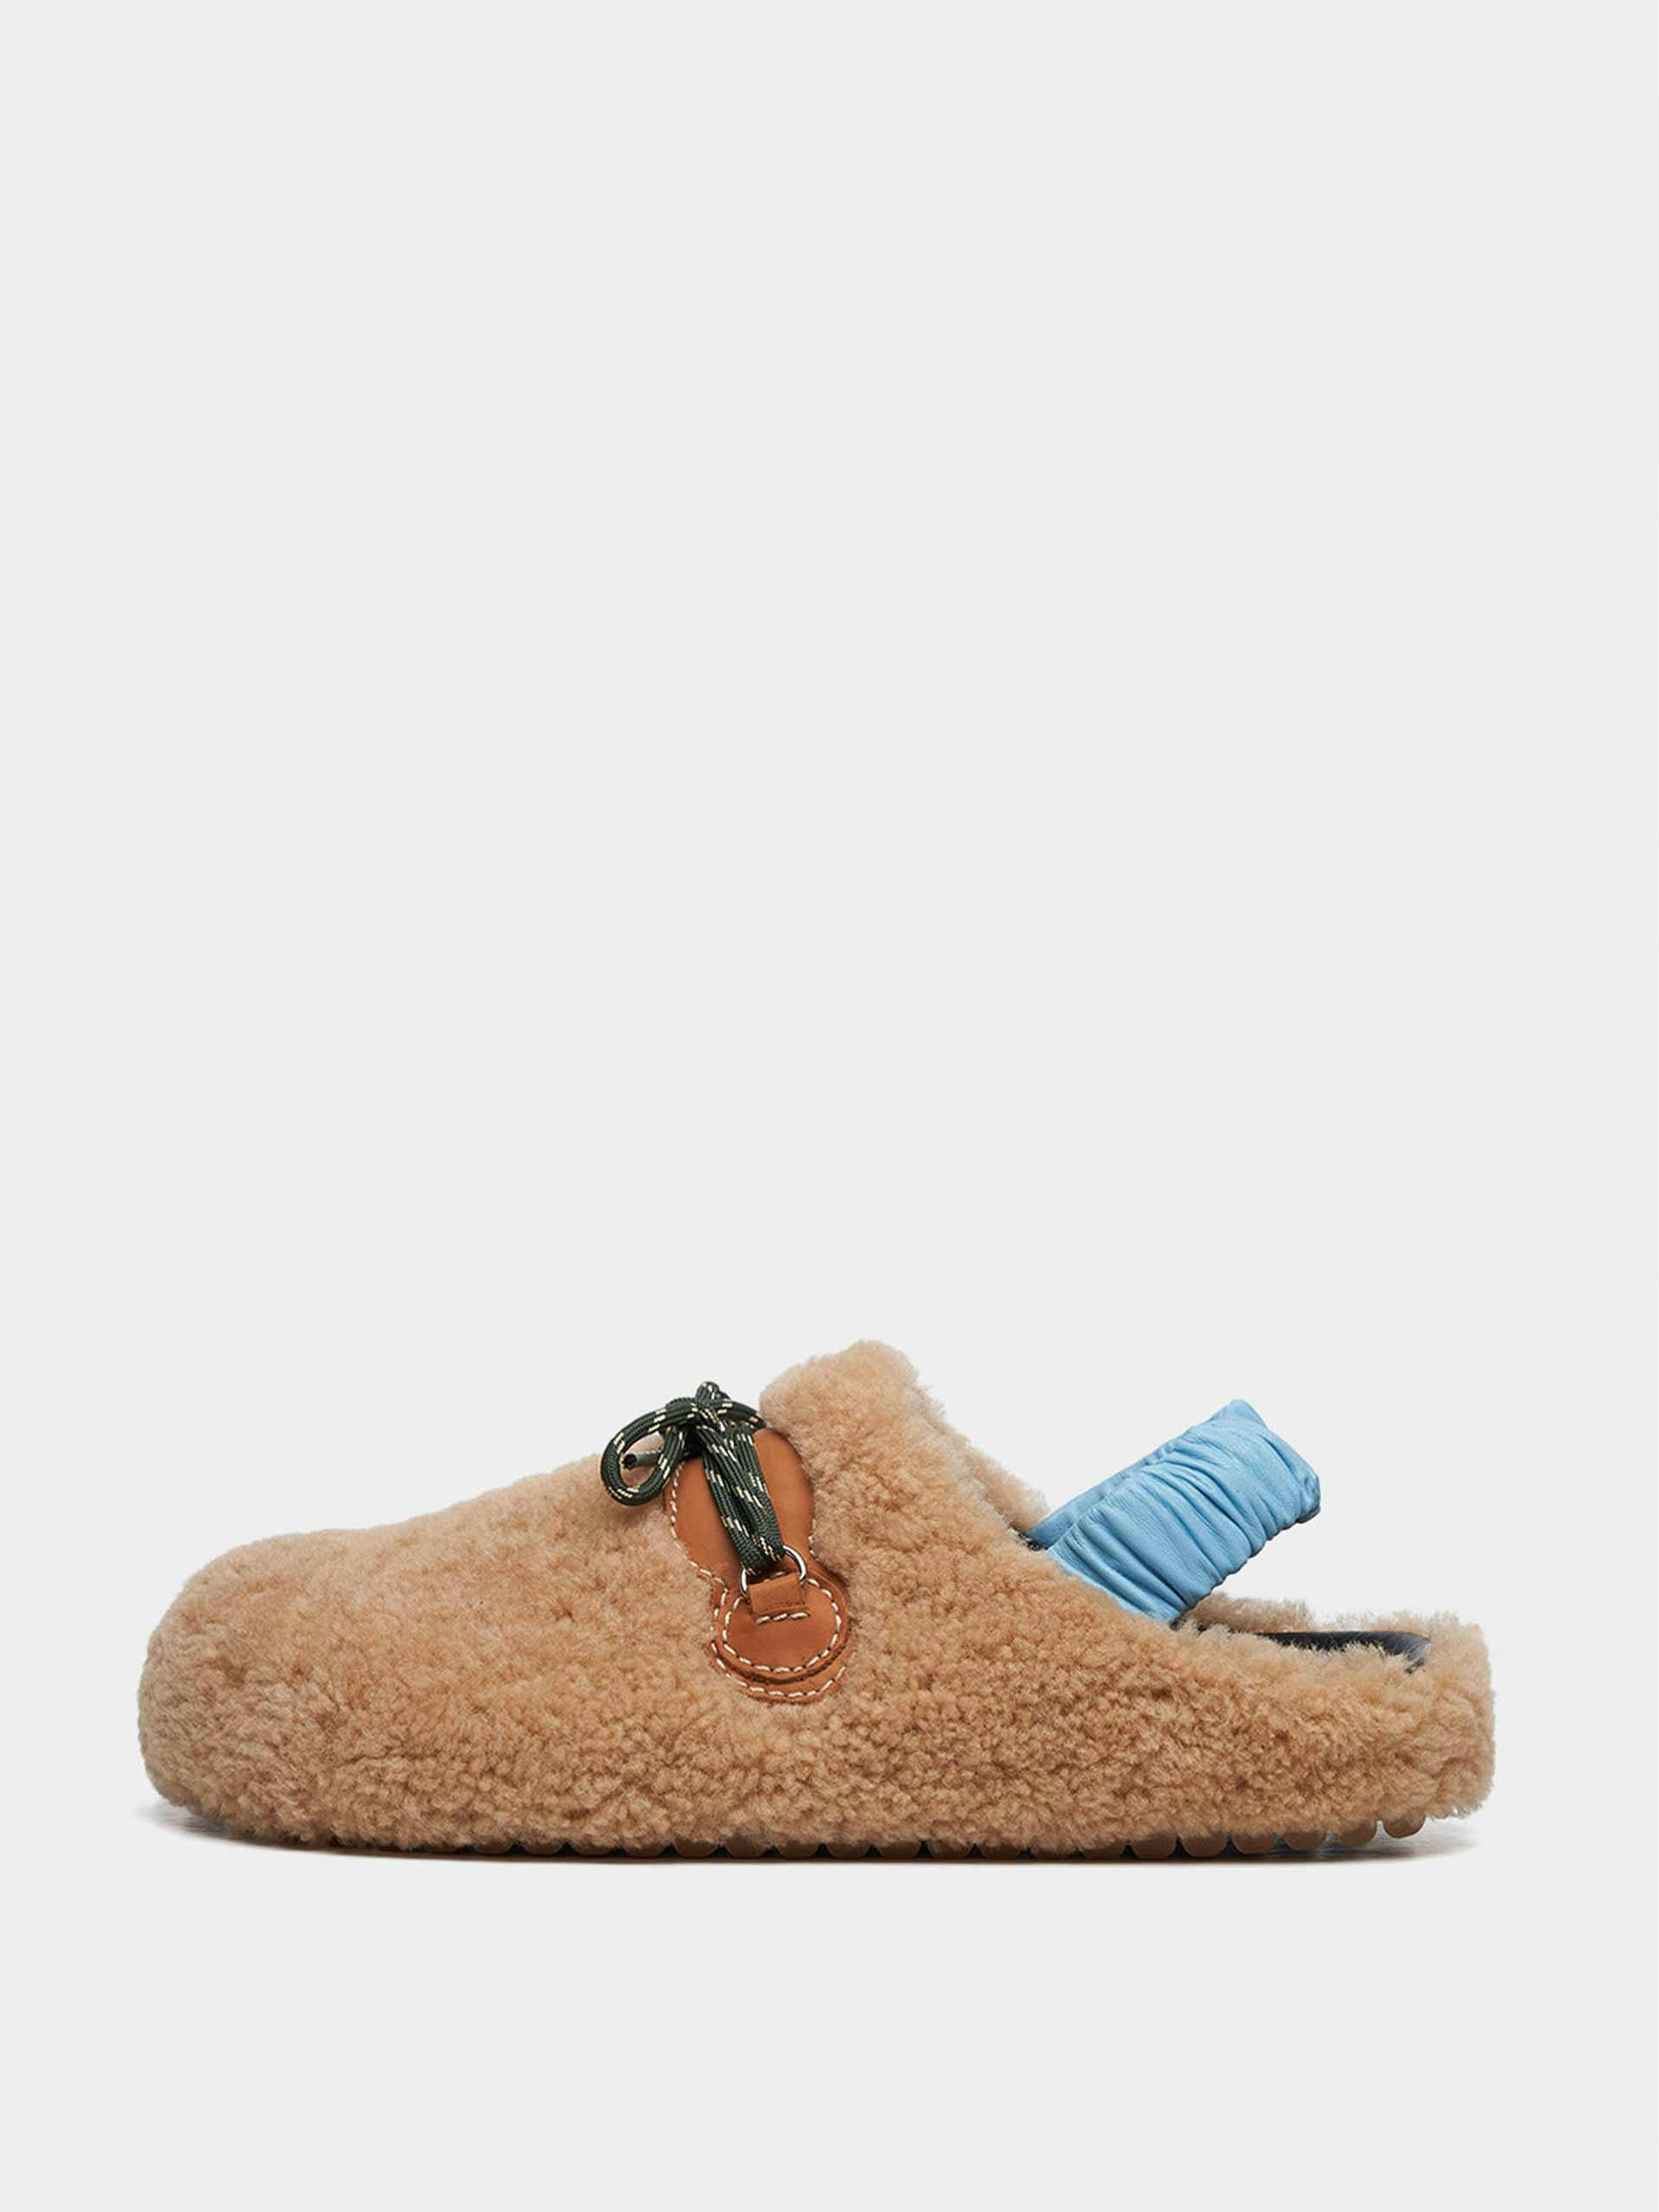 Shearling and leather clogs